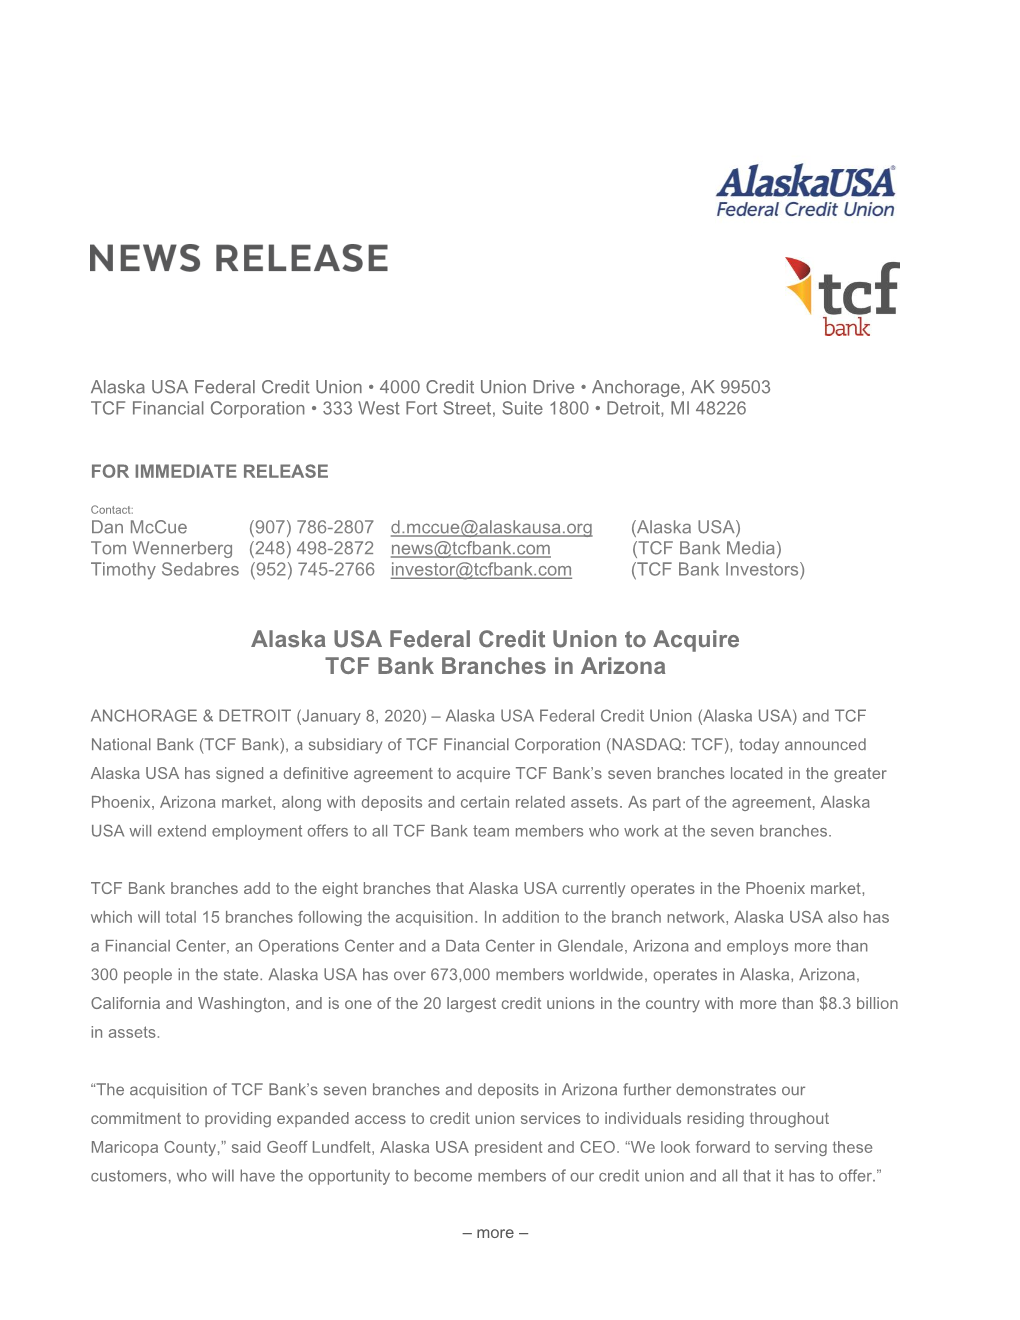 Alaska USA Federal Credit Union to Acquire TCF Bank Branches in Arizona